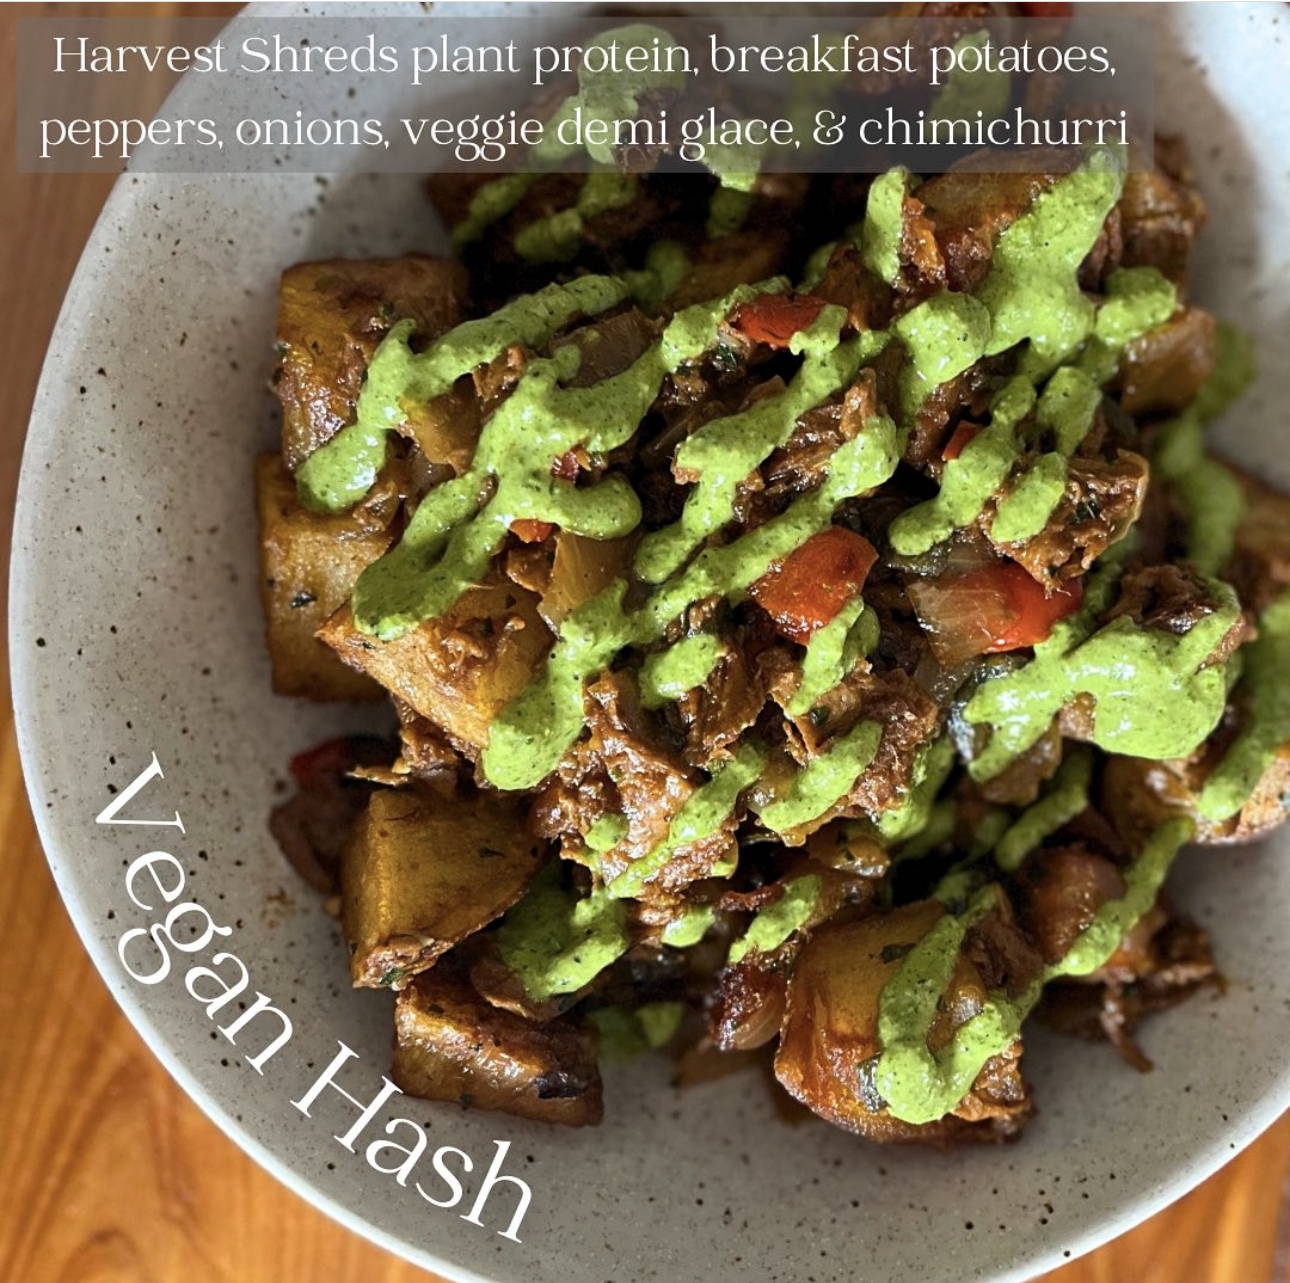 Speckled bowl filled with Harvest Shreds plant protein, breakfast potatoes, peppers, onions, veggie demi glace and a drizzle of chimichurri. Vegan Hash.